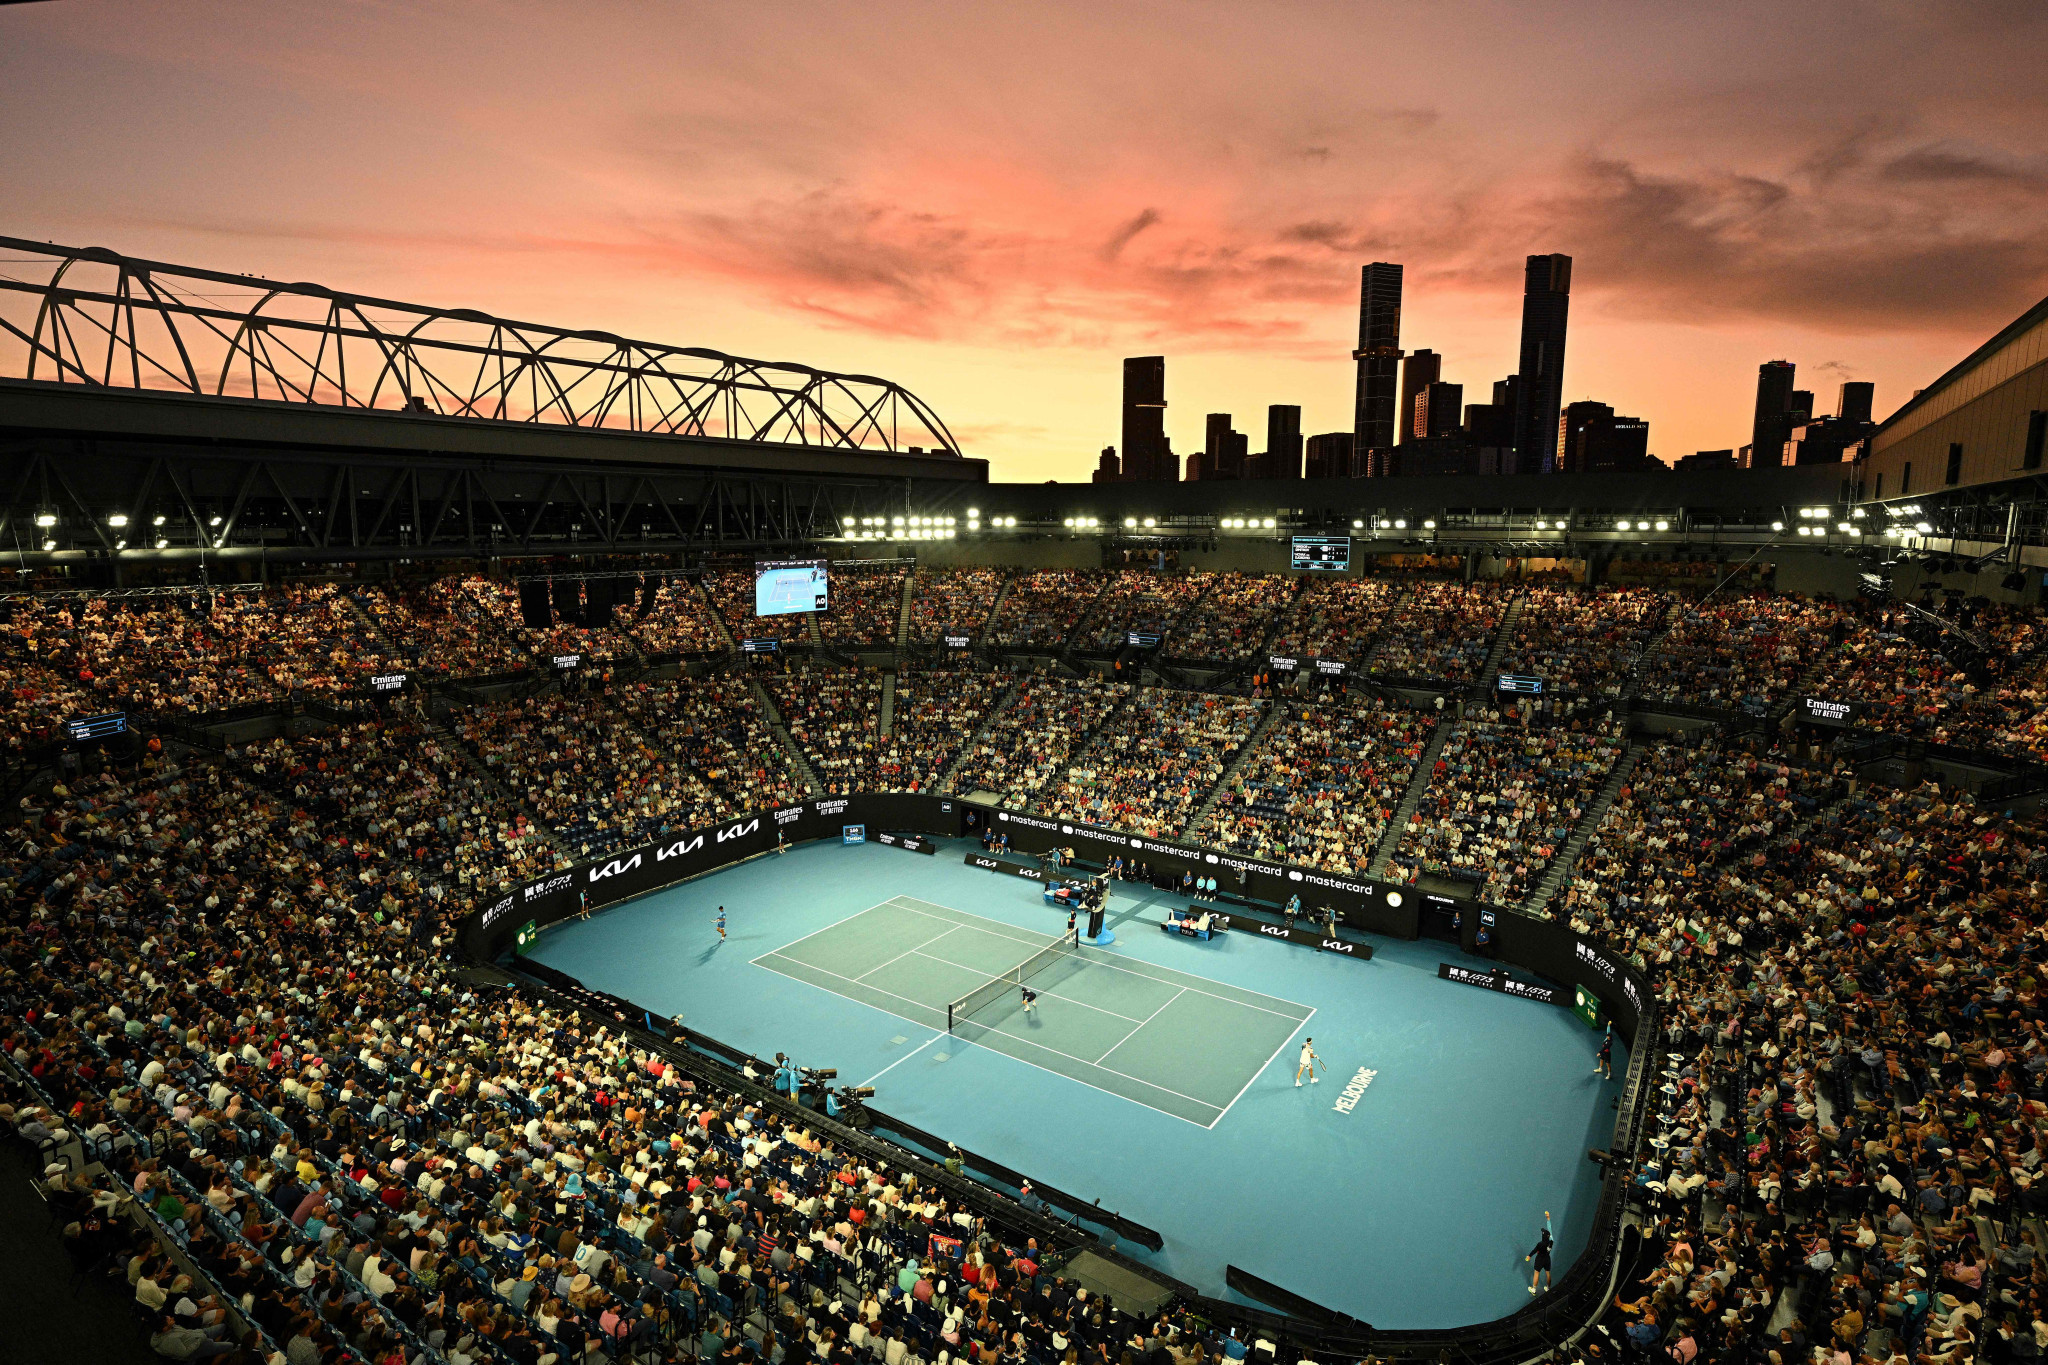 A record 94,854 people attended yesterday's day and night sessions at the Australian Open ©Getty Images